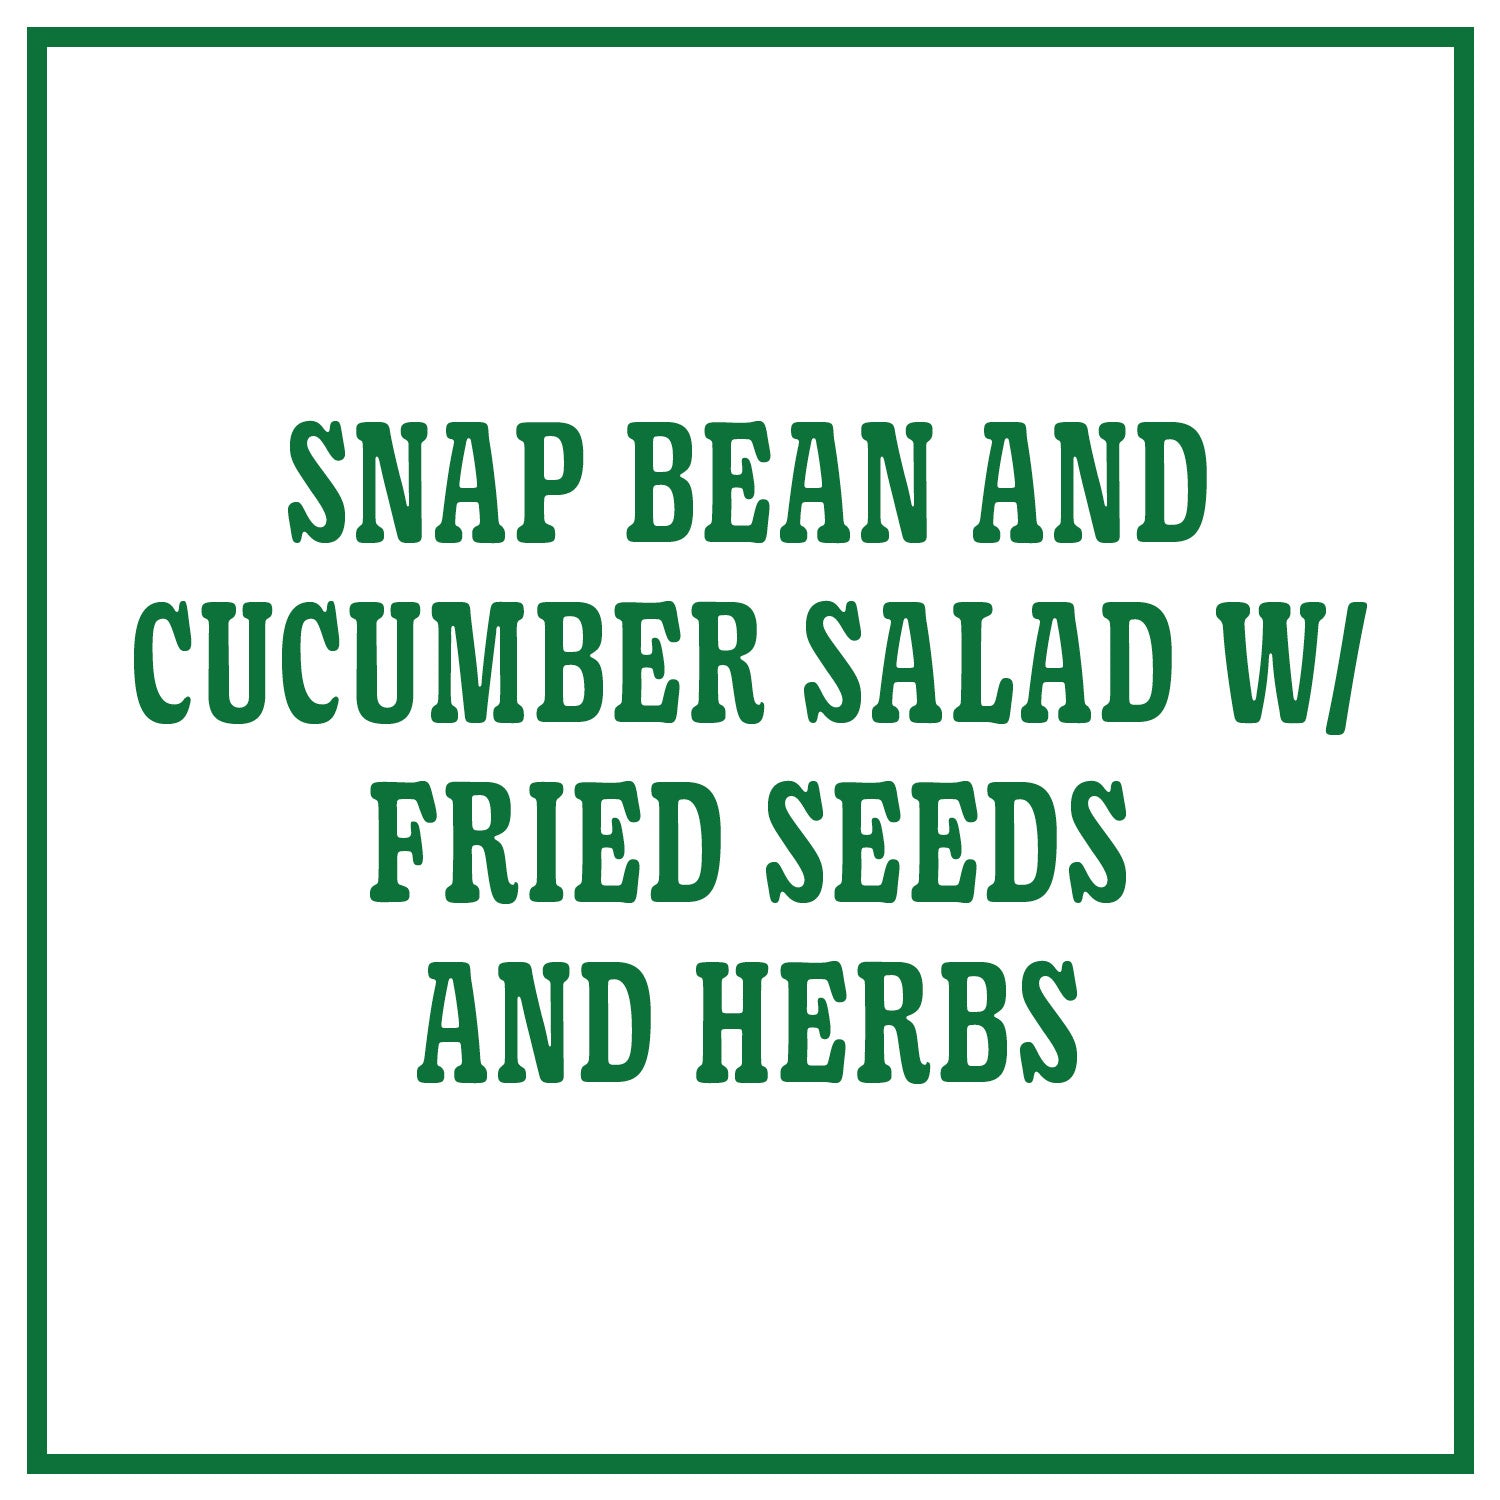 Snap Bean and Cucumber Salad with Fried Seeds and Herbs